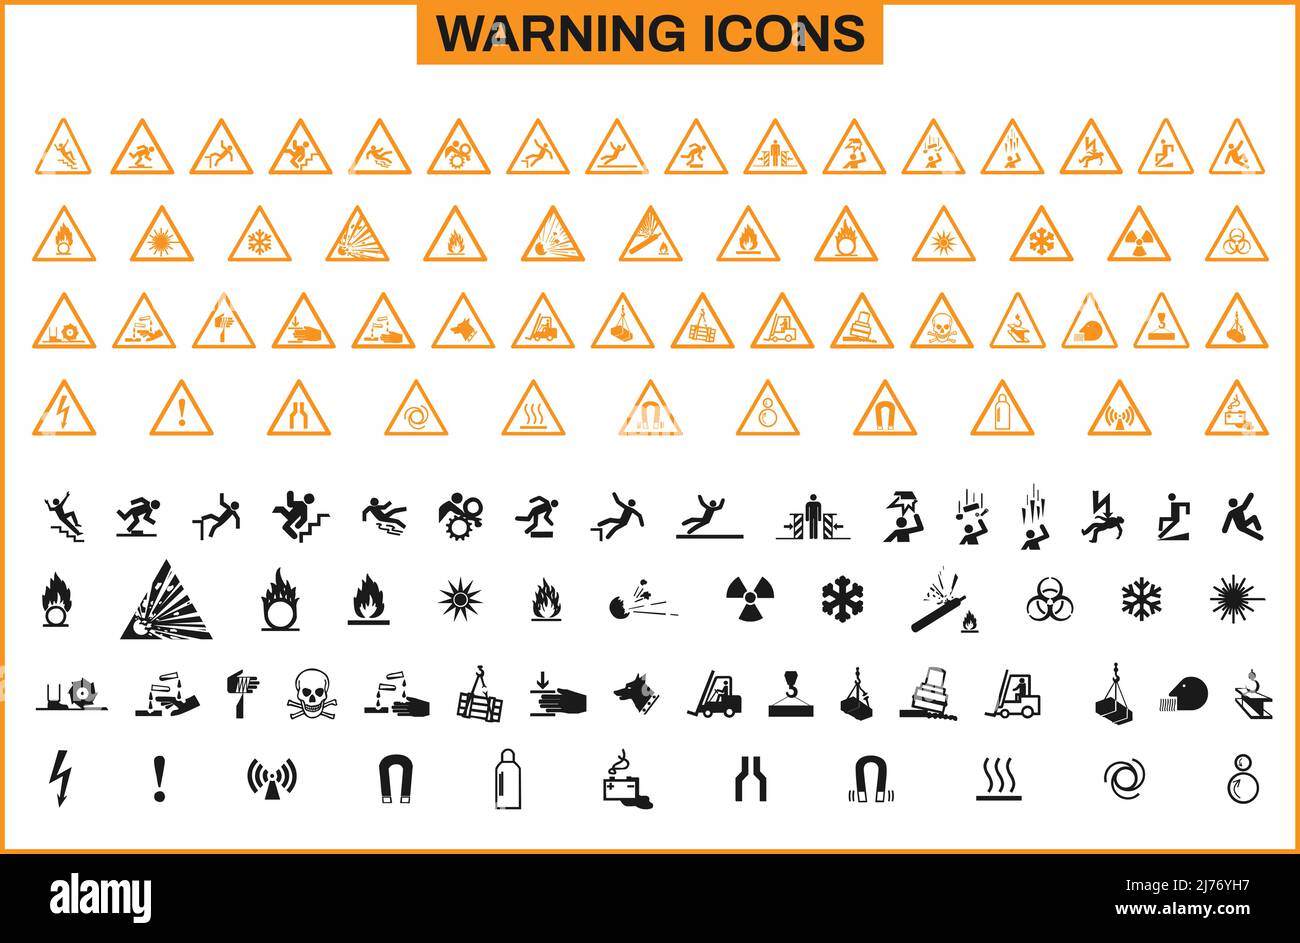 Warning Icon Set In Black And Yellow Color Stock Vector